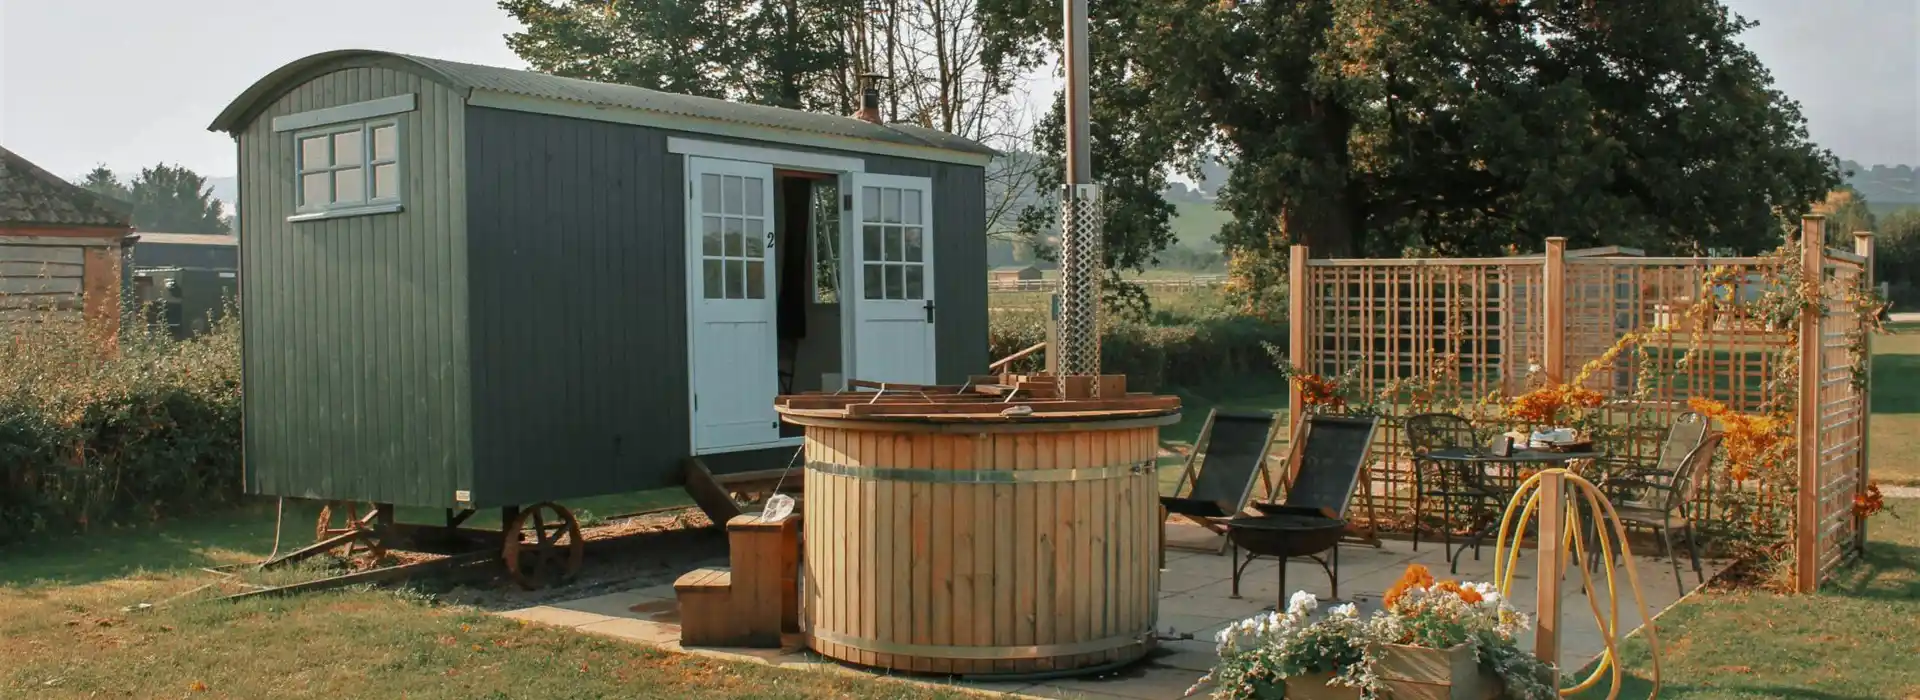 Shepherds hut holidays with hot tubs